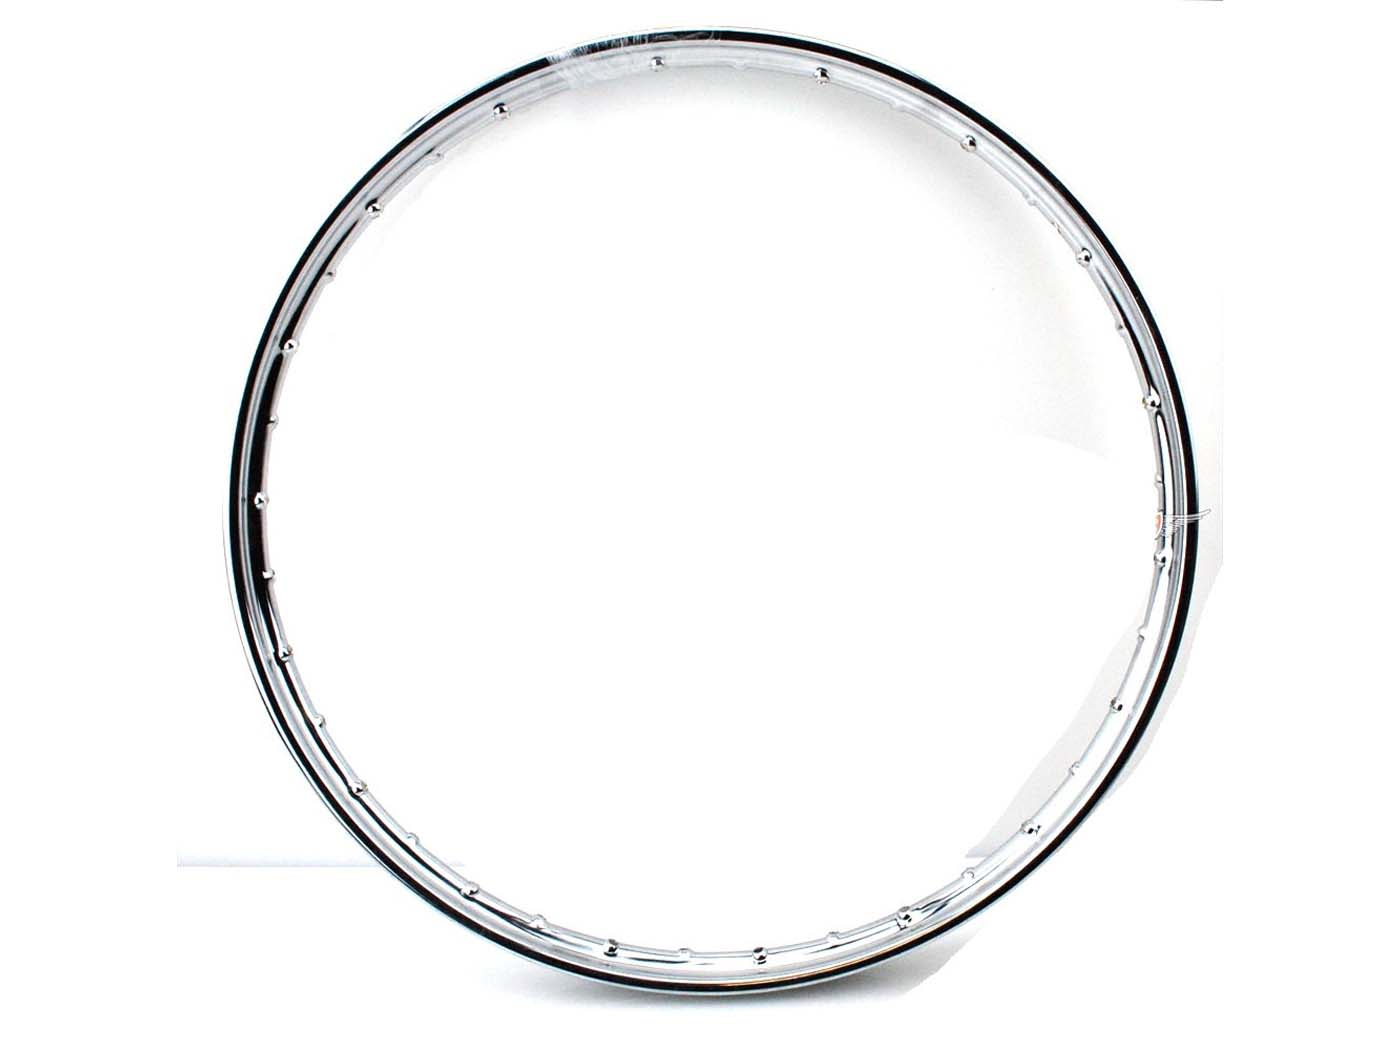 Chrome Rim 1.20 X 22 Inch For NSU Quickly Moped